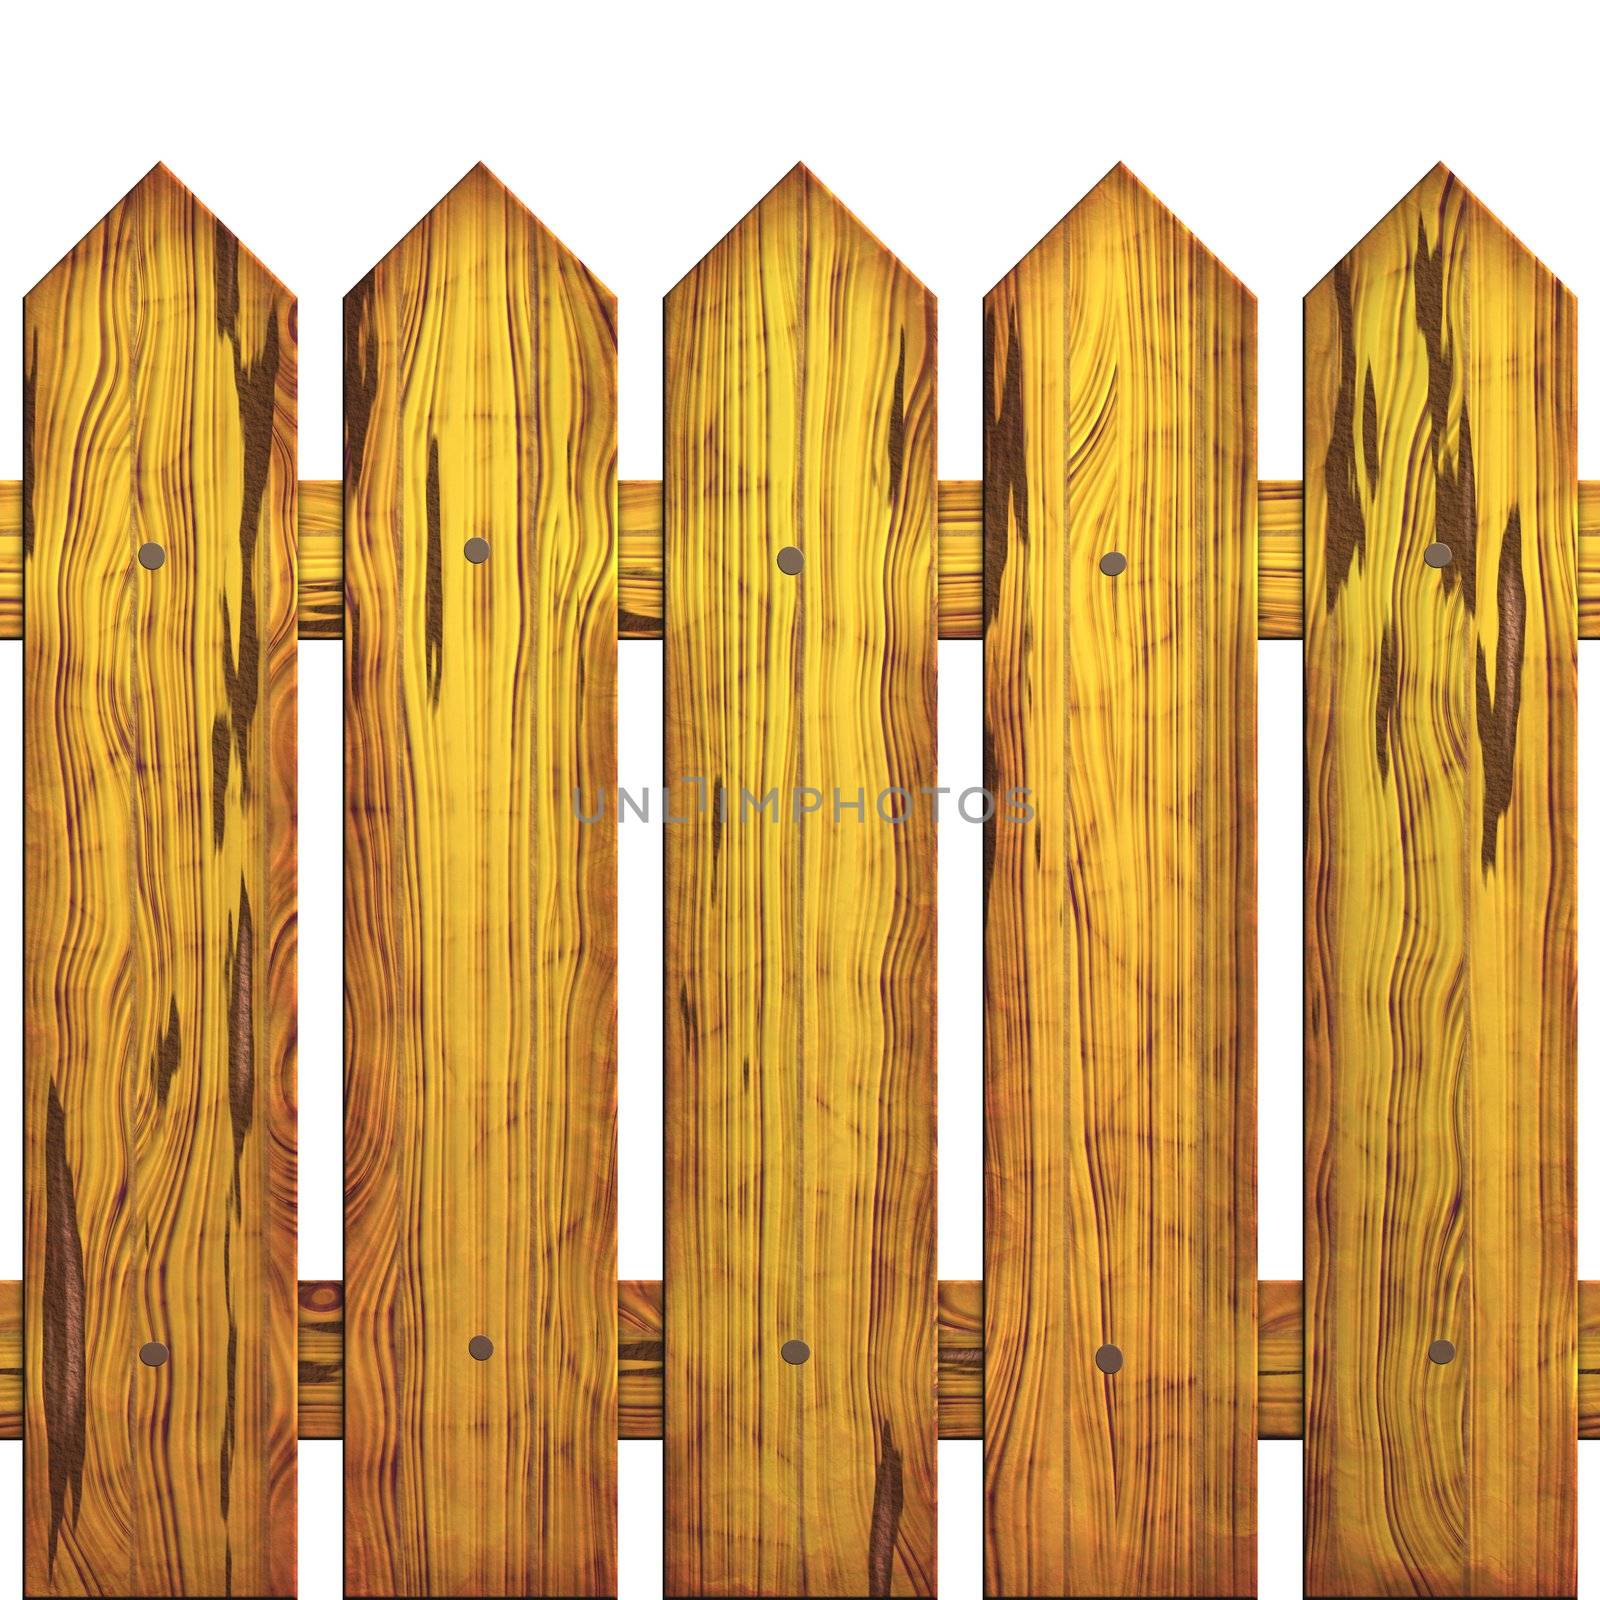 Image of wooden protection which is made of qualitative pine tree